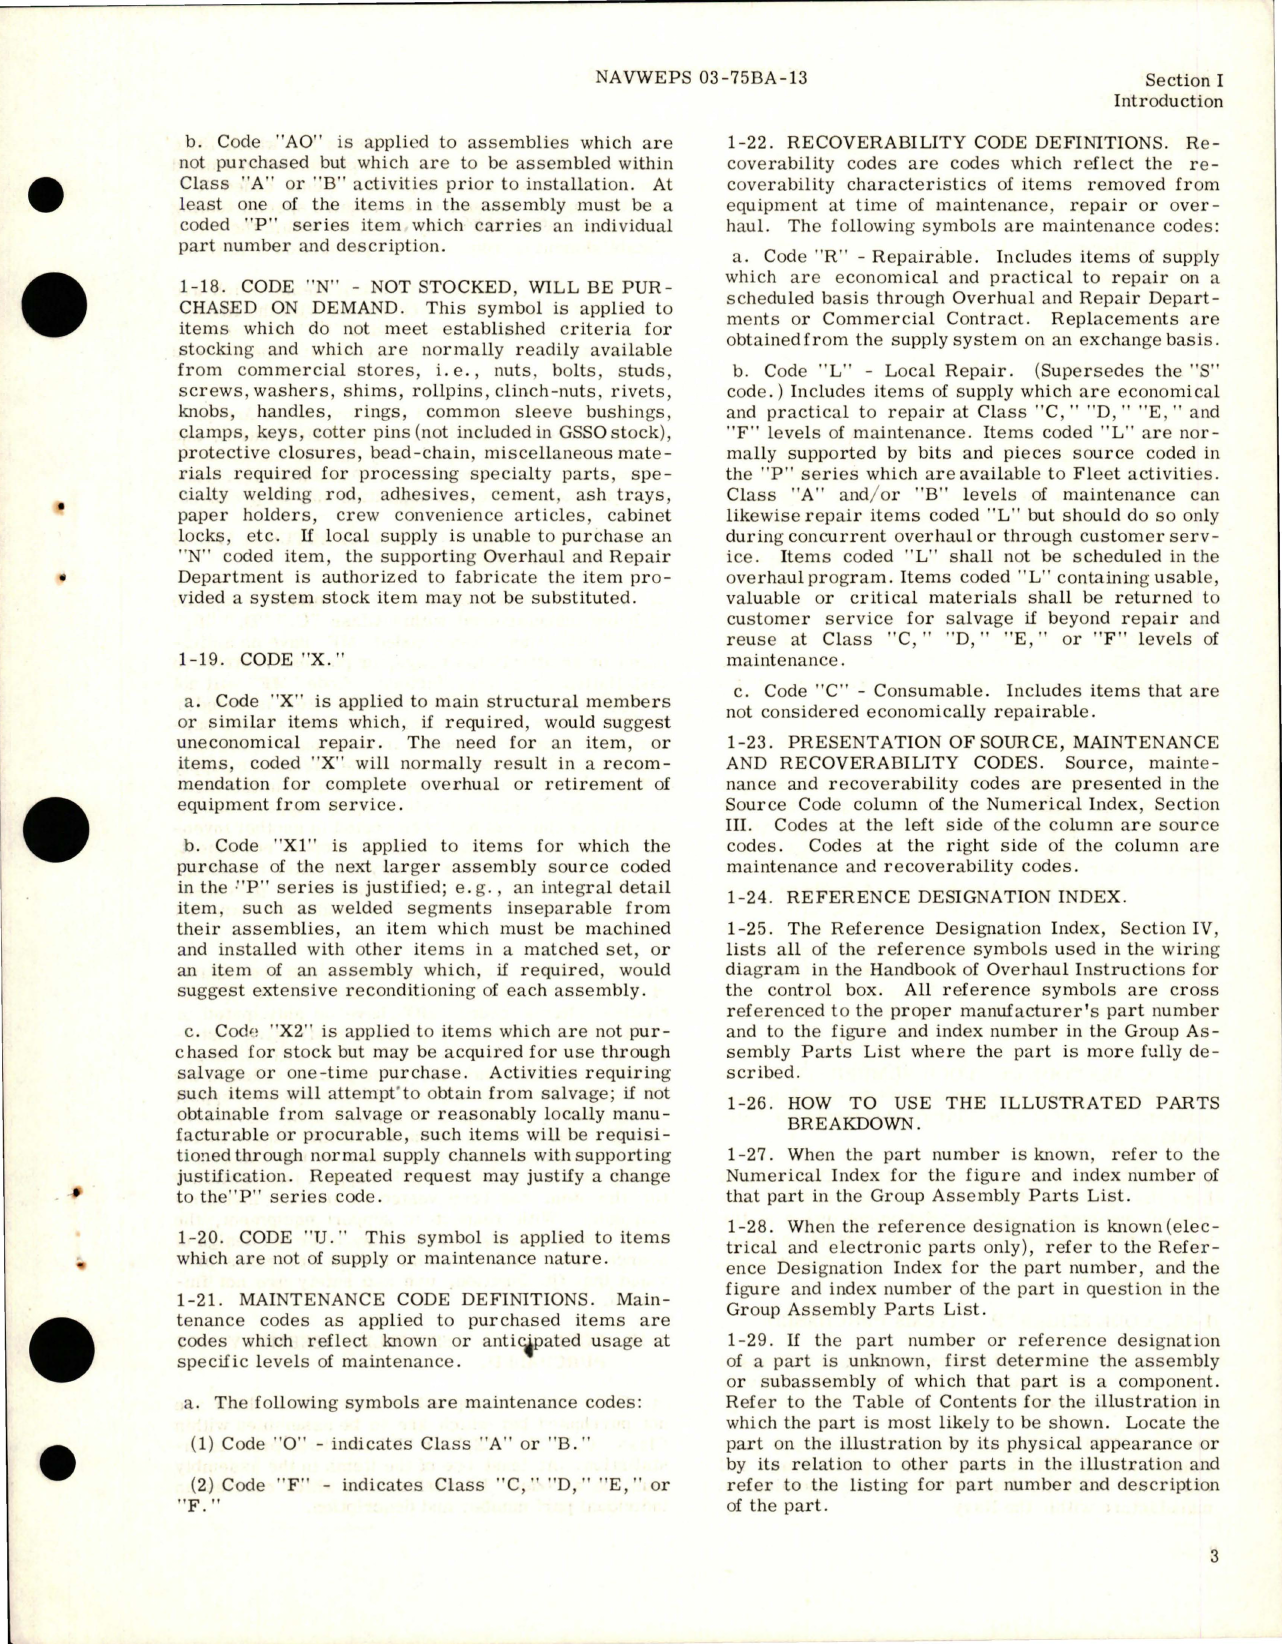 Sample page 7 from AirCorps Library document: Illustrated Parts Breakdown for Control Box Cockpit Temperature - Part CYLZ 5511-1